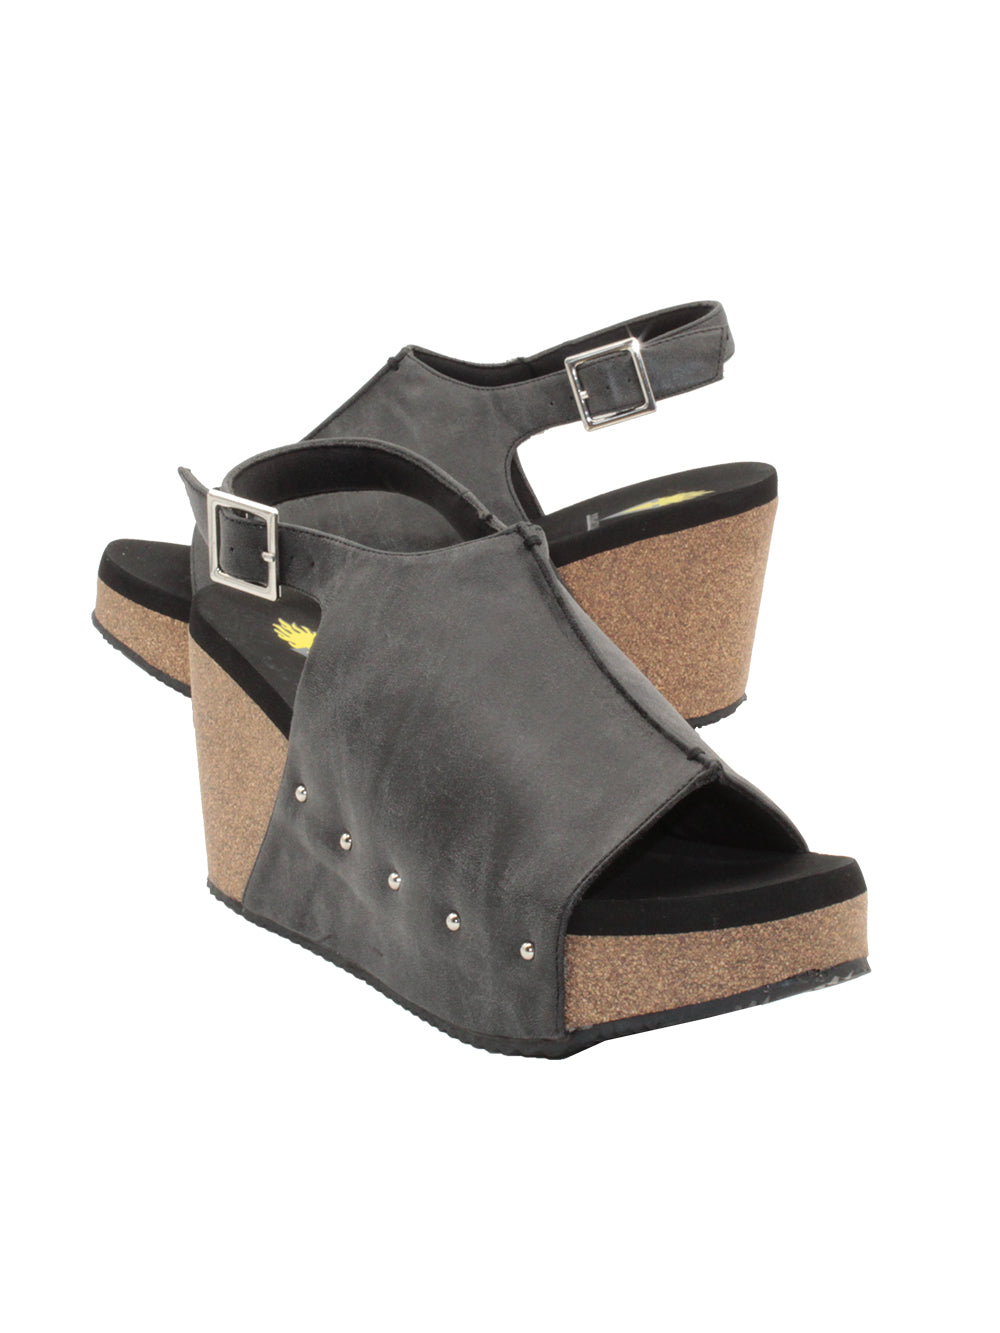 One of Volatile’s classic signature styles, the black Division wedge sandal brings ultra-comfort to casual fashion like no other. The adjustable ankle strap offers stability, the padded lining and signature ultra-comfort EVA insole keeps feet feeling rested even after a full day of adventure, and the rubber traction outsole means these are safe for walking on any surface. Pack these for your next trip to wear with shorts for sightseeing and a flowy dress for special events.2